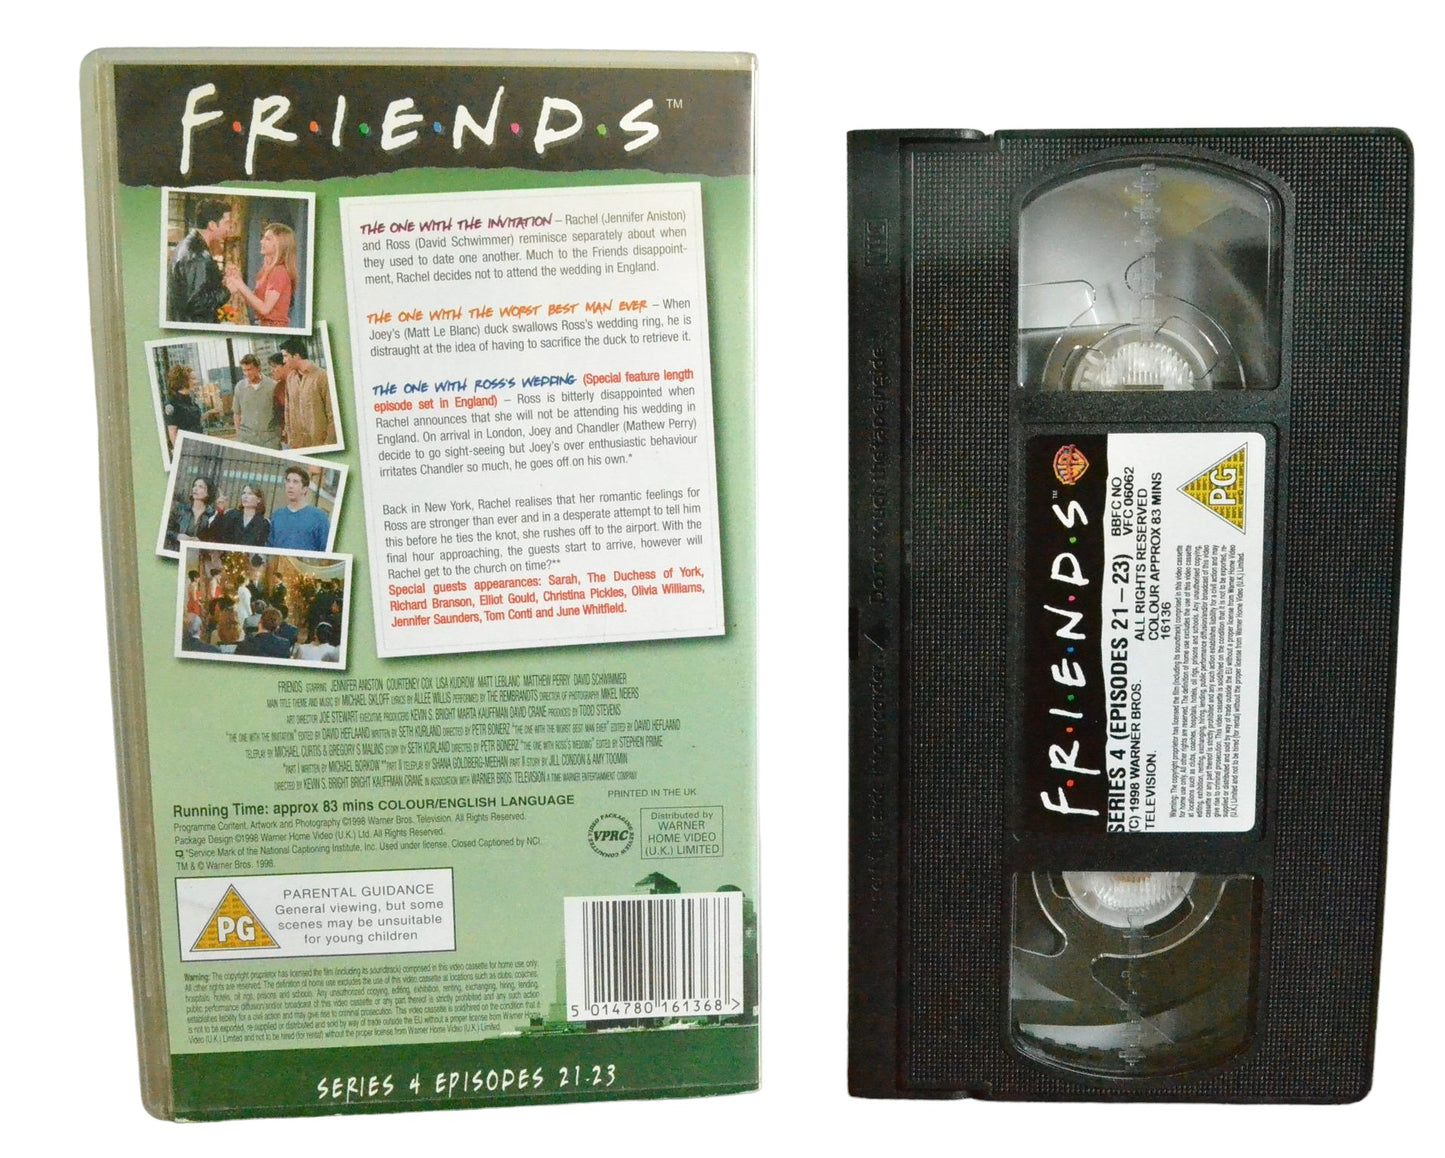 Friends Series 4 (Episodes 21 - 23) - Jennifer Aniston - Warner Home Video - SO16136 - Comedy - Pal - VHS-